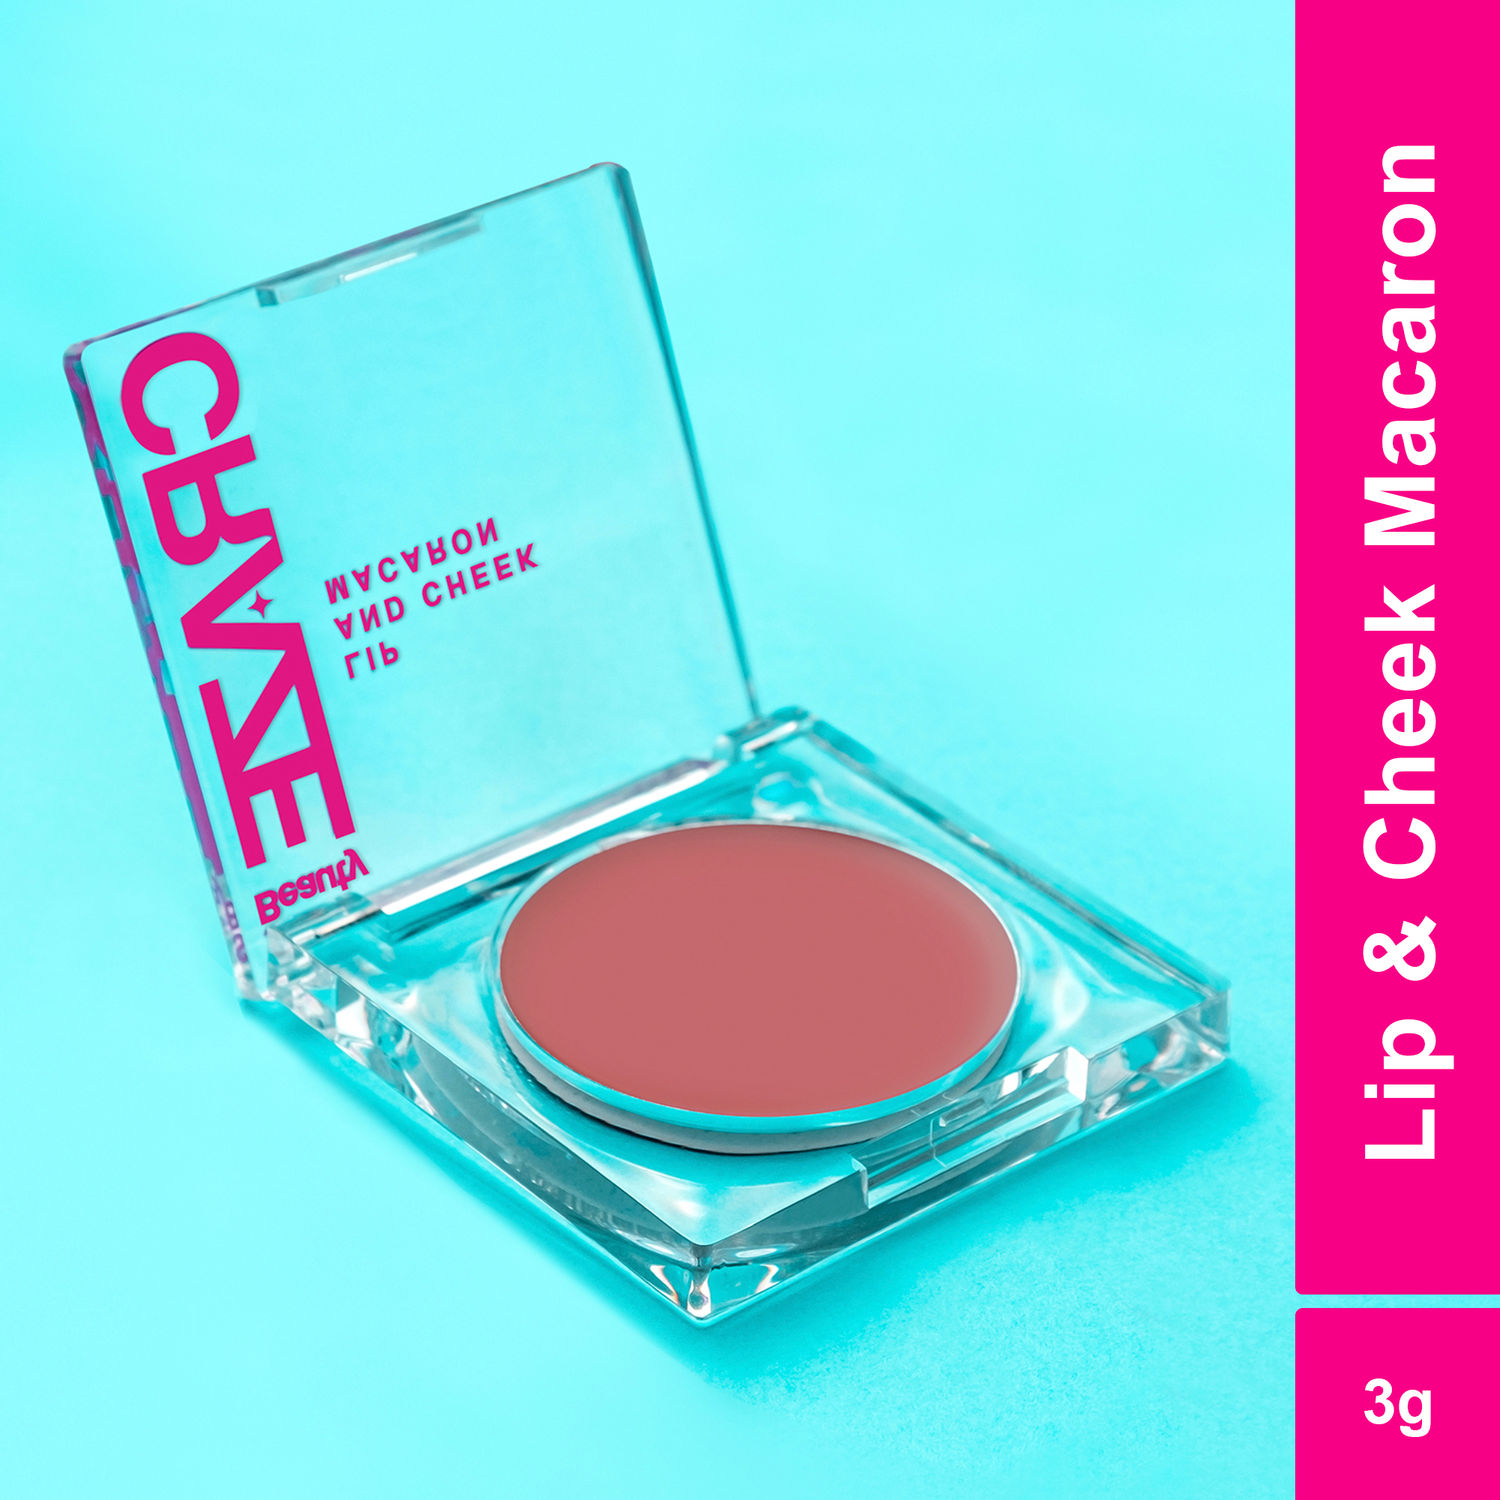 Swiss Beauty Craze Lip and Cheek Macaron | With goodness of Vitamin E and Olive oil | Multipurpose cream for Lips, cheeks and eyelids |Shade-4, Pink Jelly |